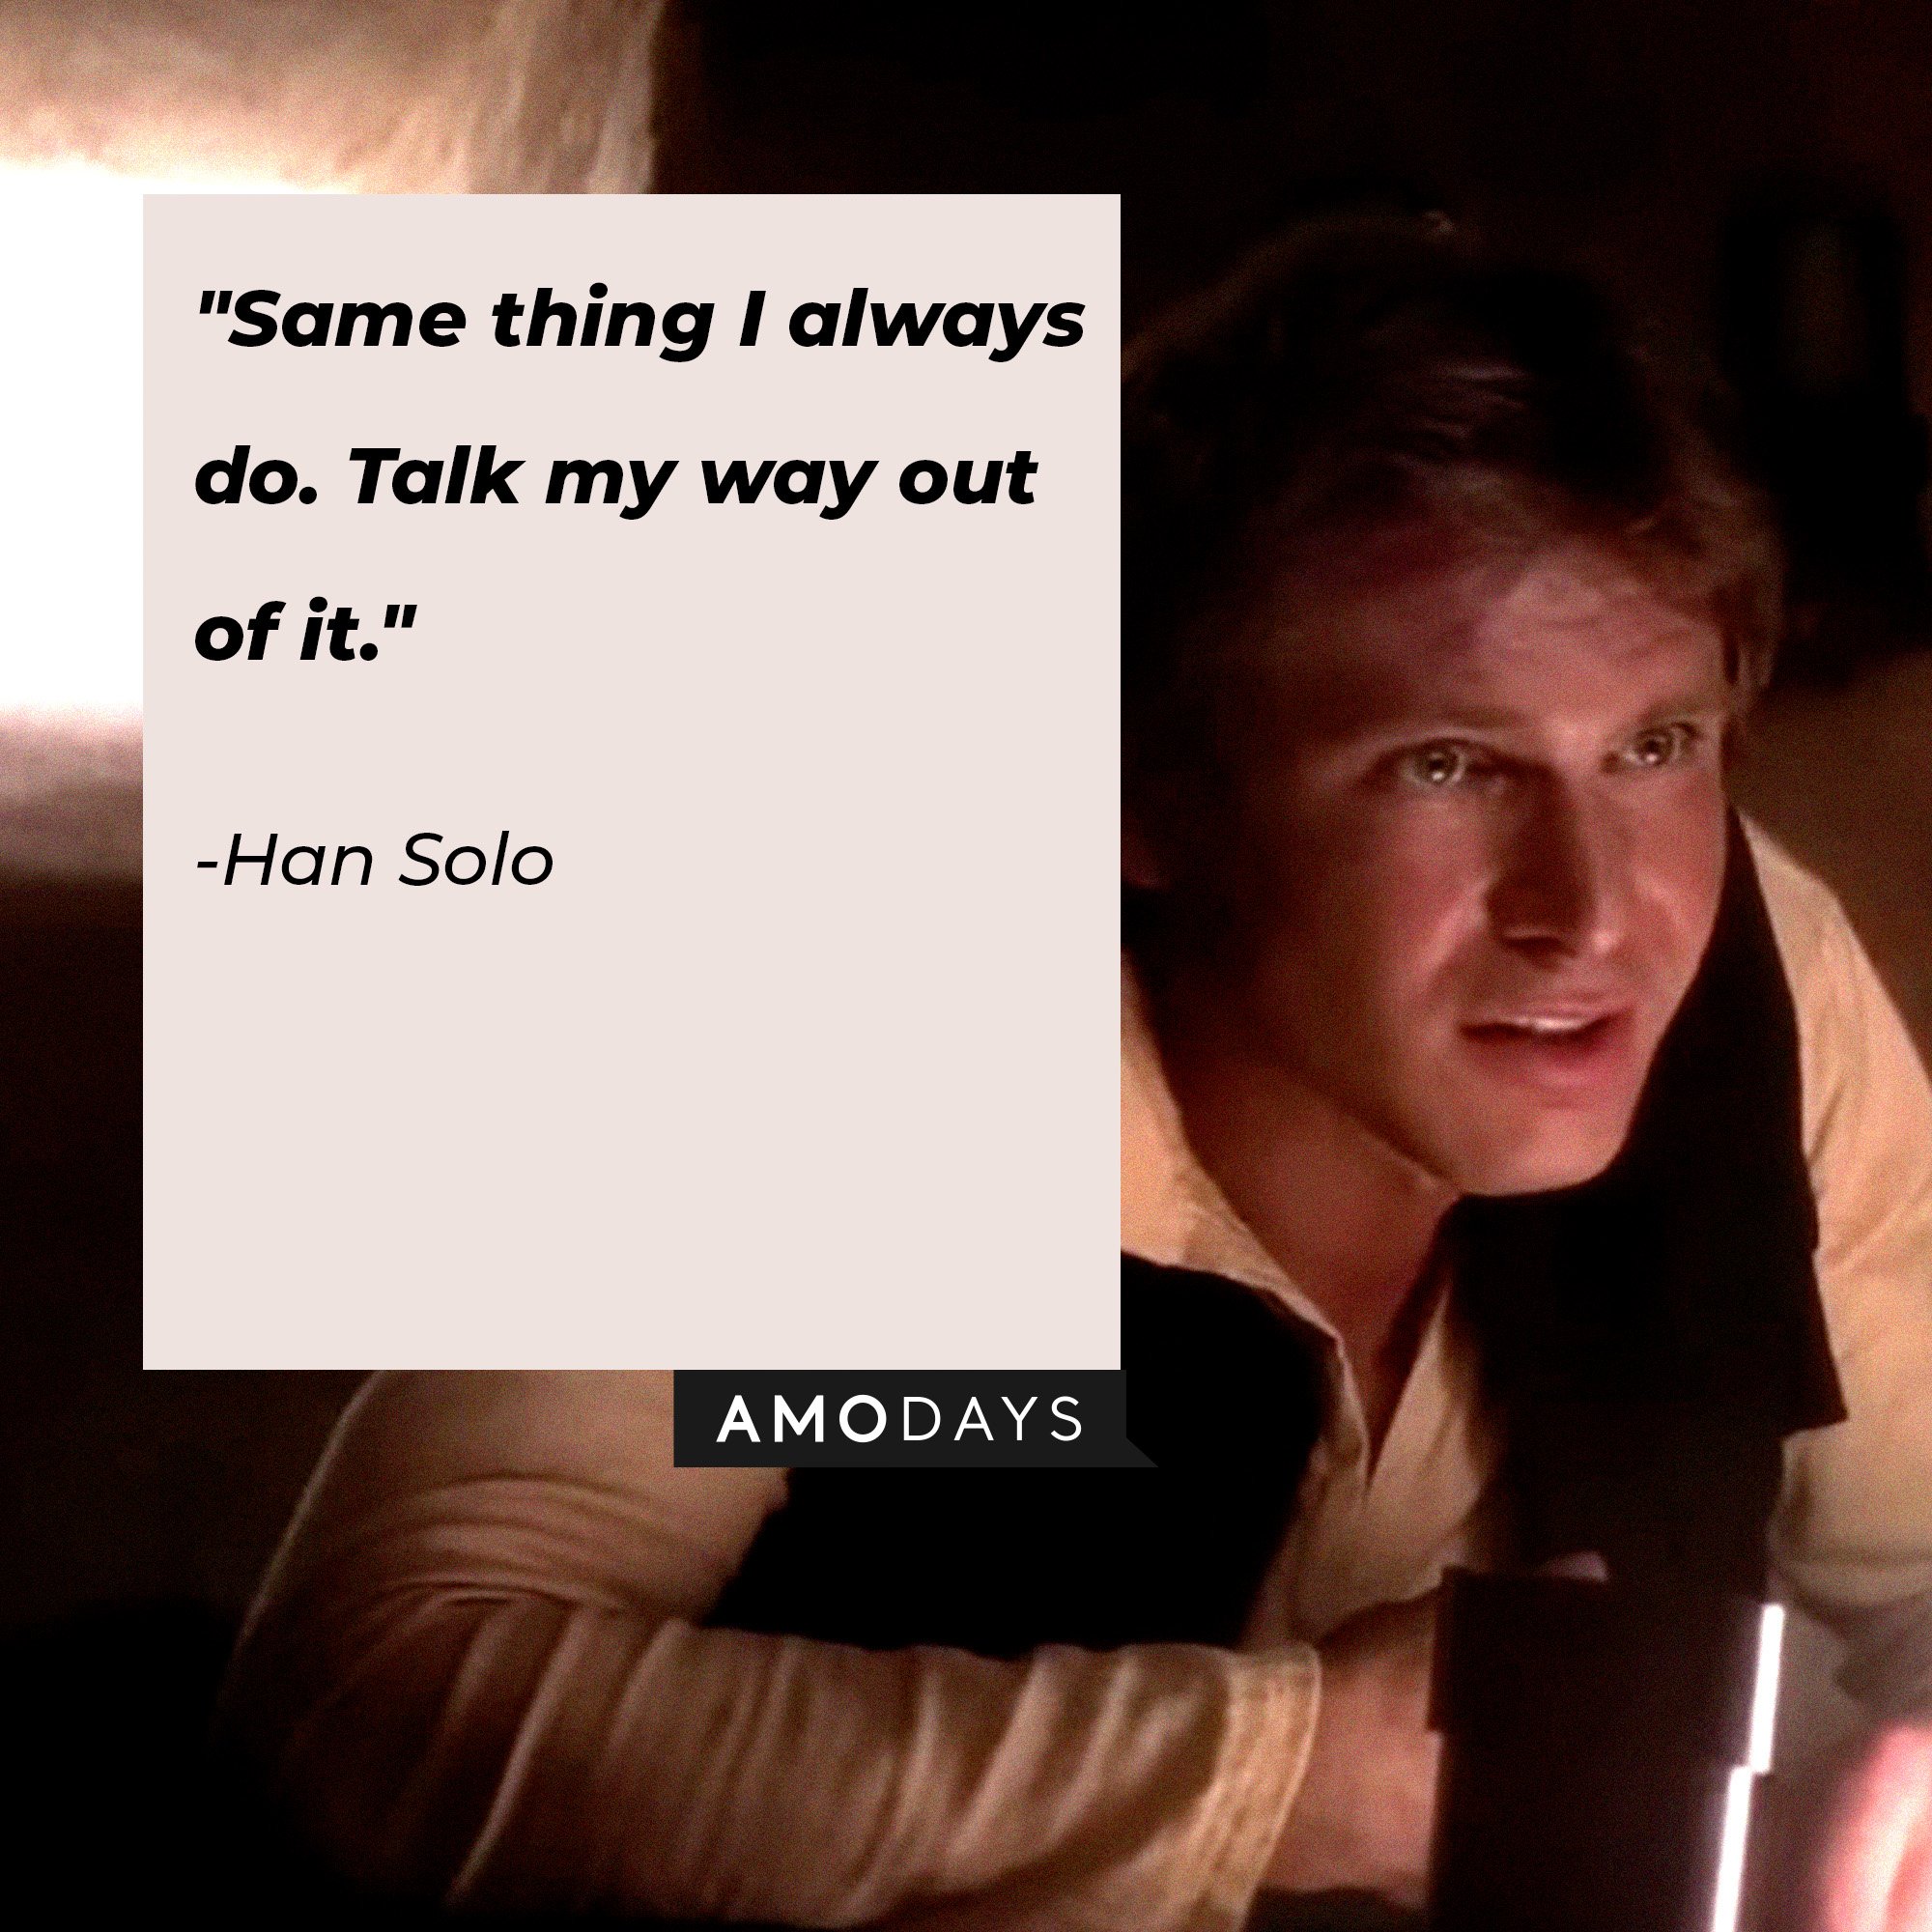 Han Solo’s quote: "Same thing I always do. Talk my way out of it.” | Image: AmoDays